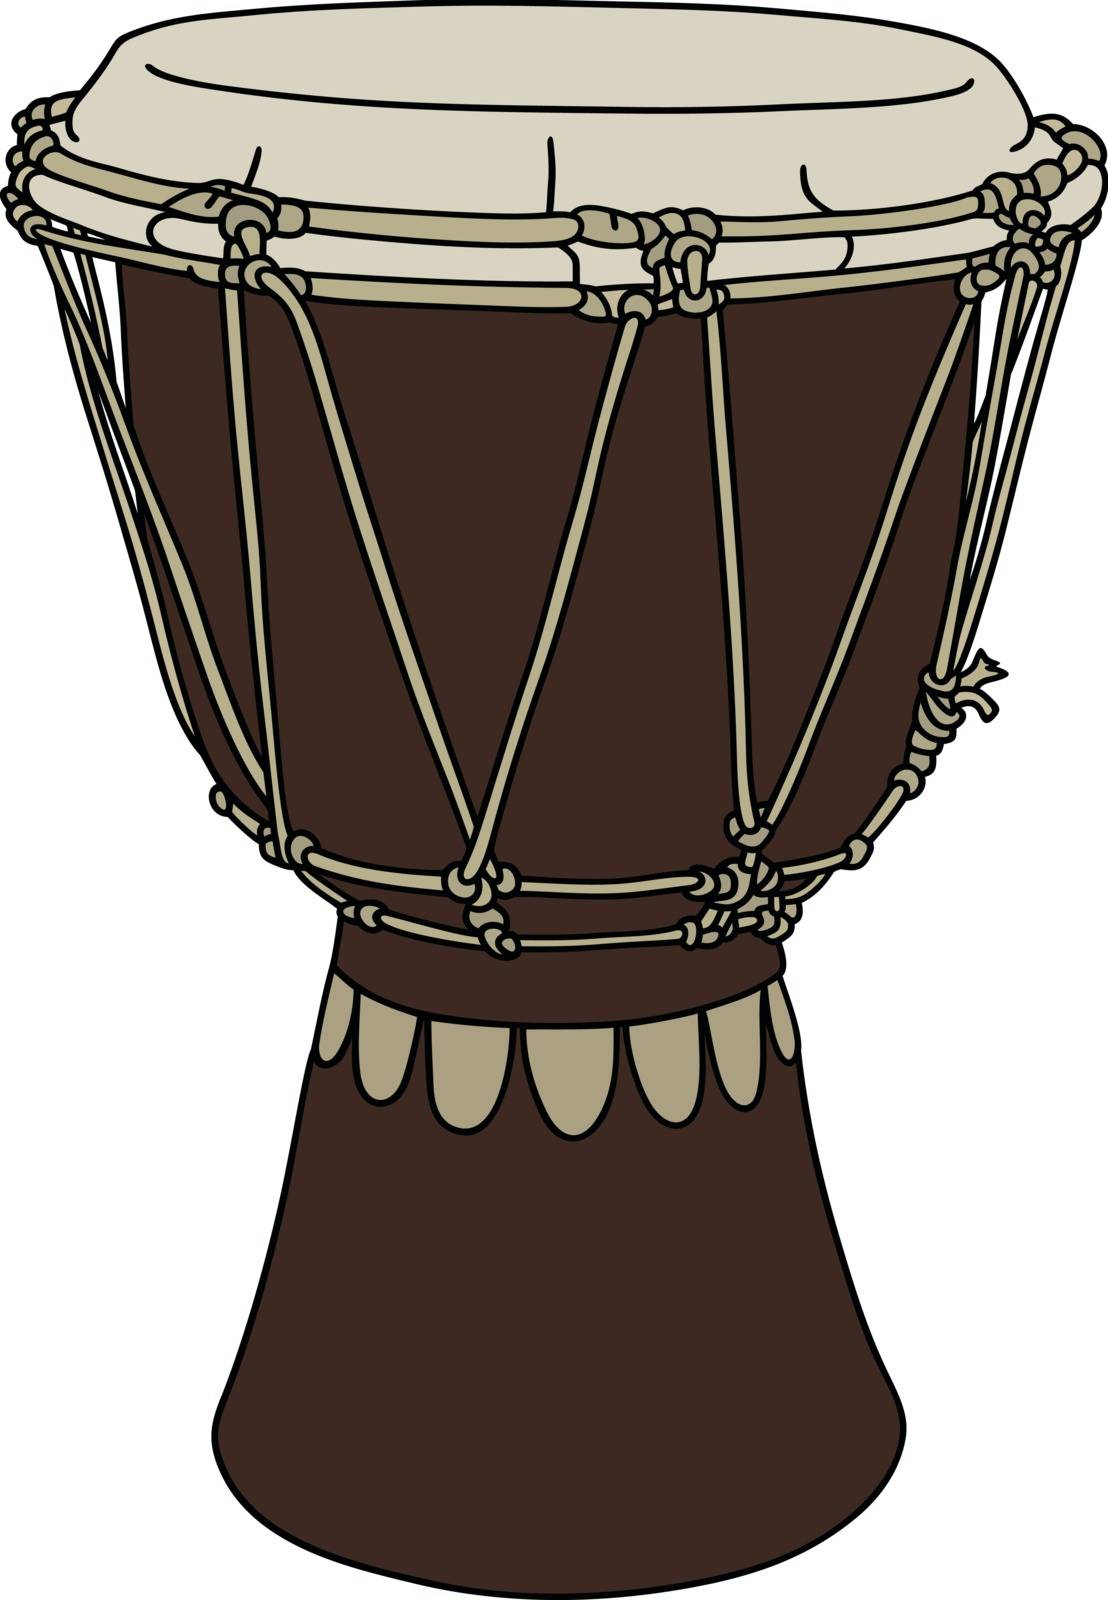 Hand drawing of a dark brown wooden small ethno drum